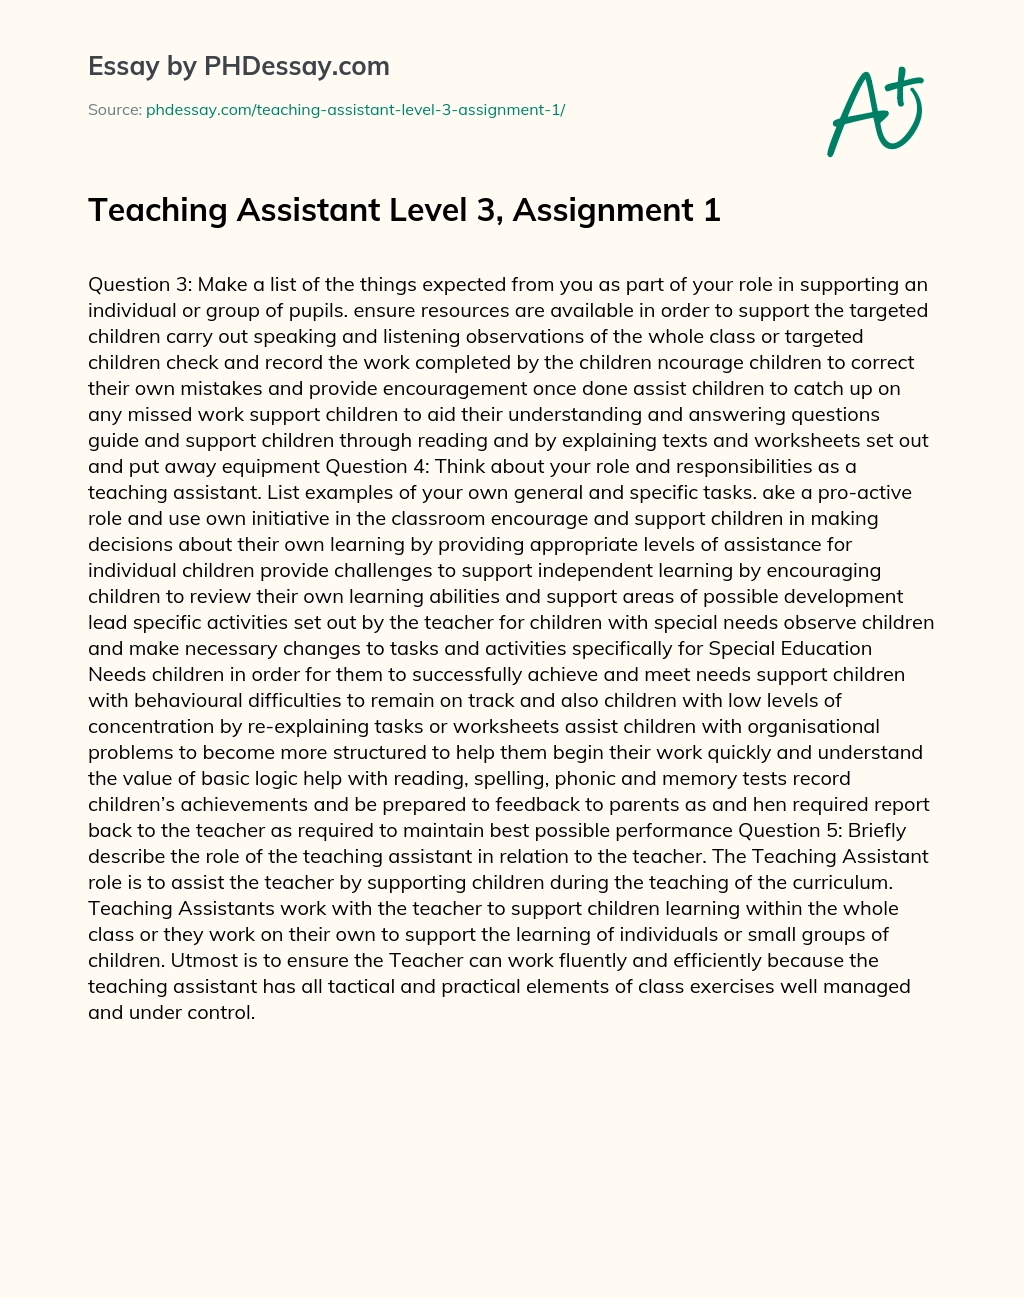 Teaching Assistant Level 3, Assignment 1 essay